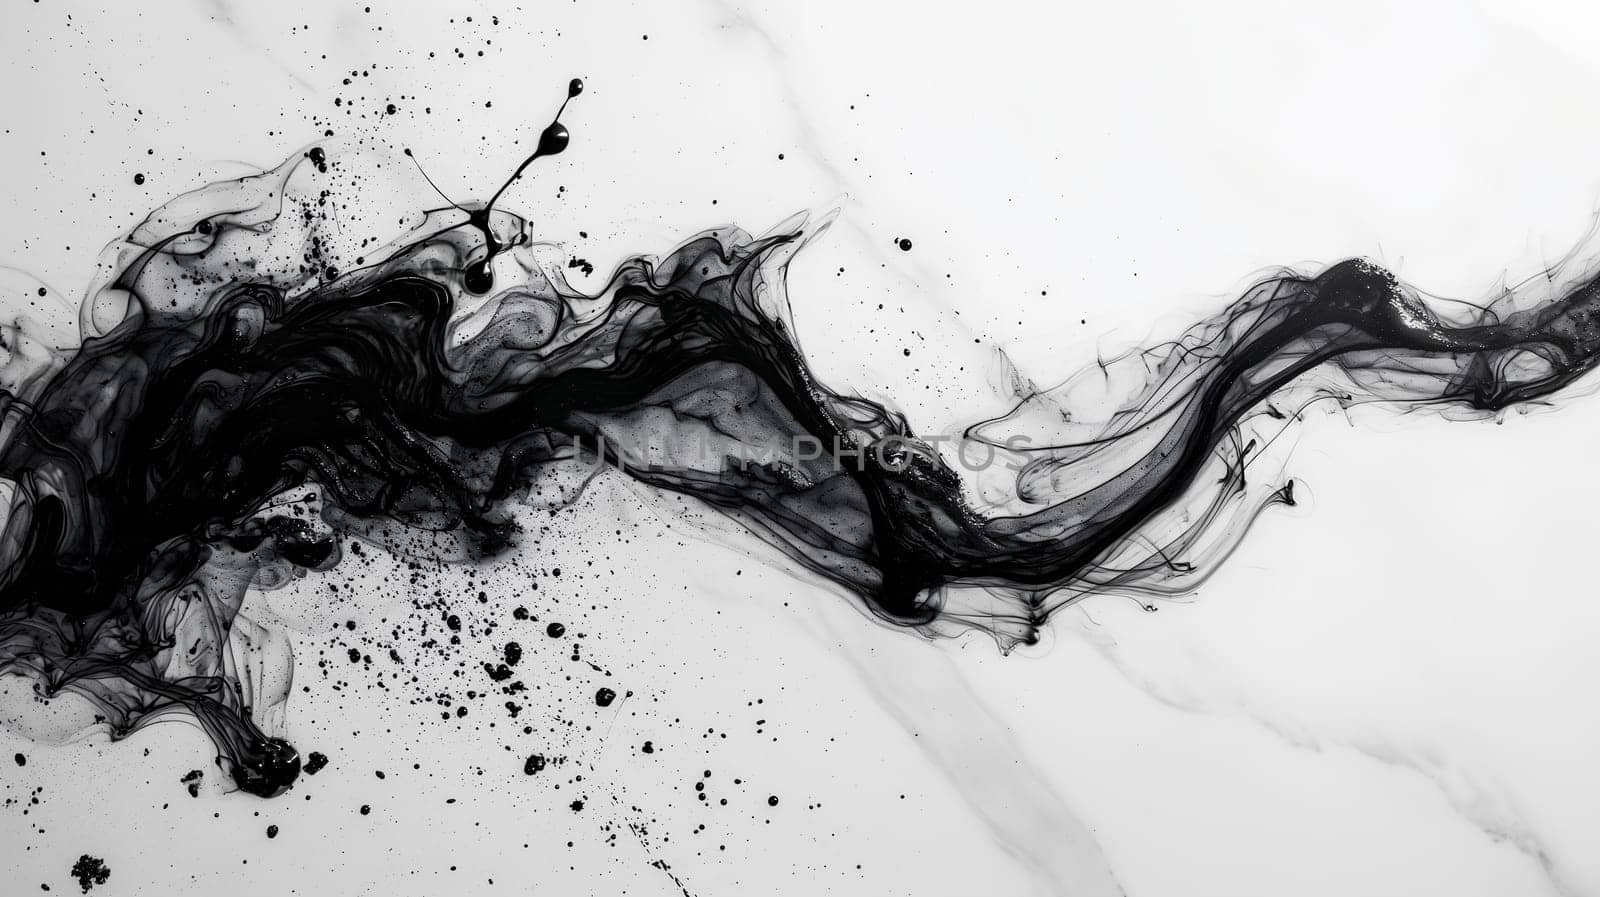 Abstract Black Ink Swirling and Diffusing in Water Against White Background by chrisroll